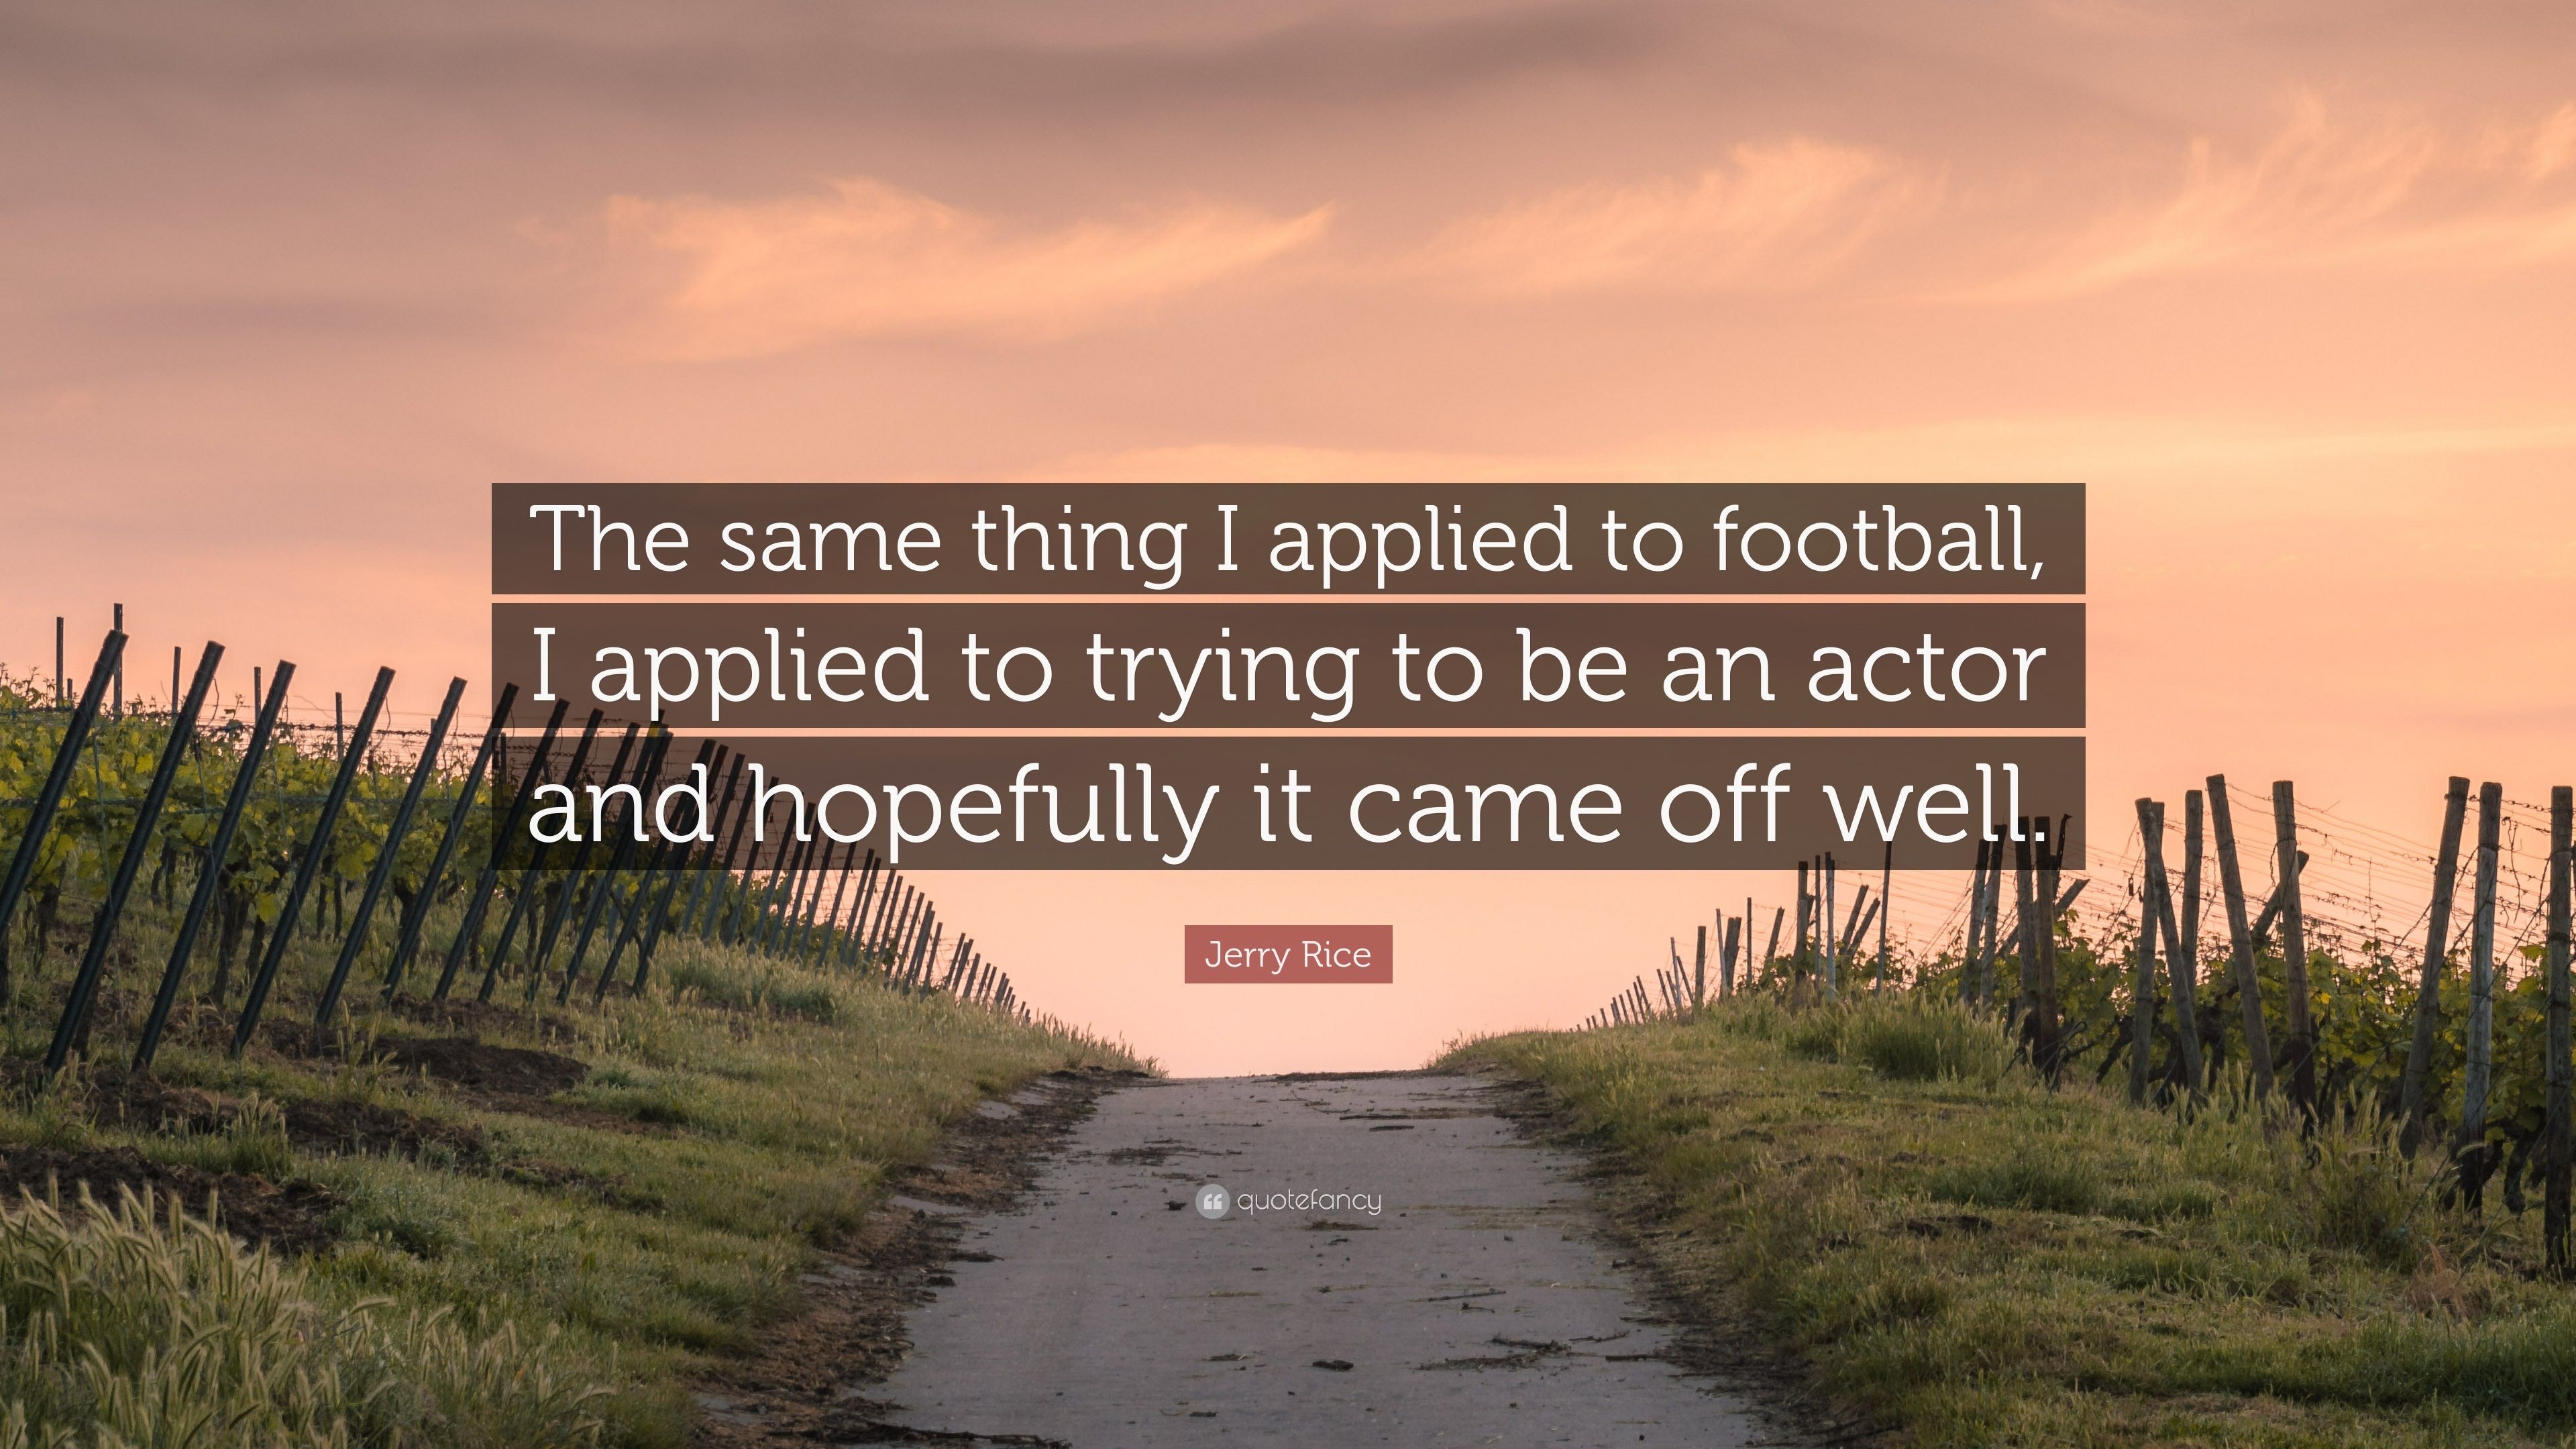 3840x2160 Jerry Rice Quote: “The same thing I applied to football, I applied to